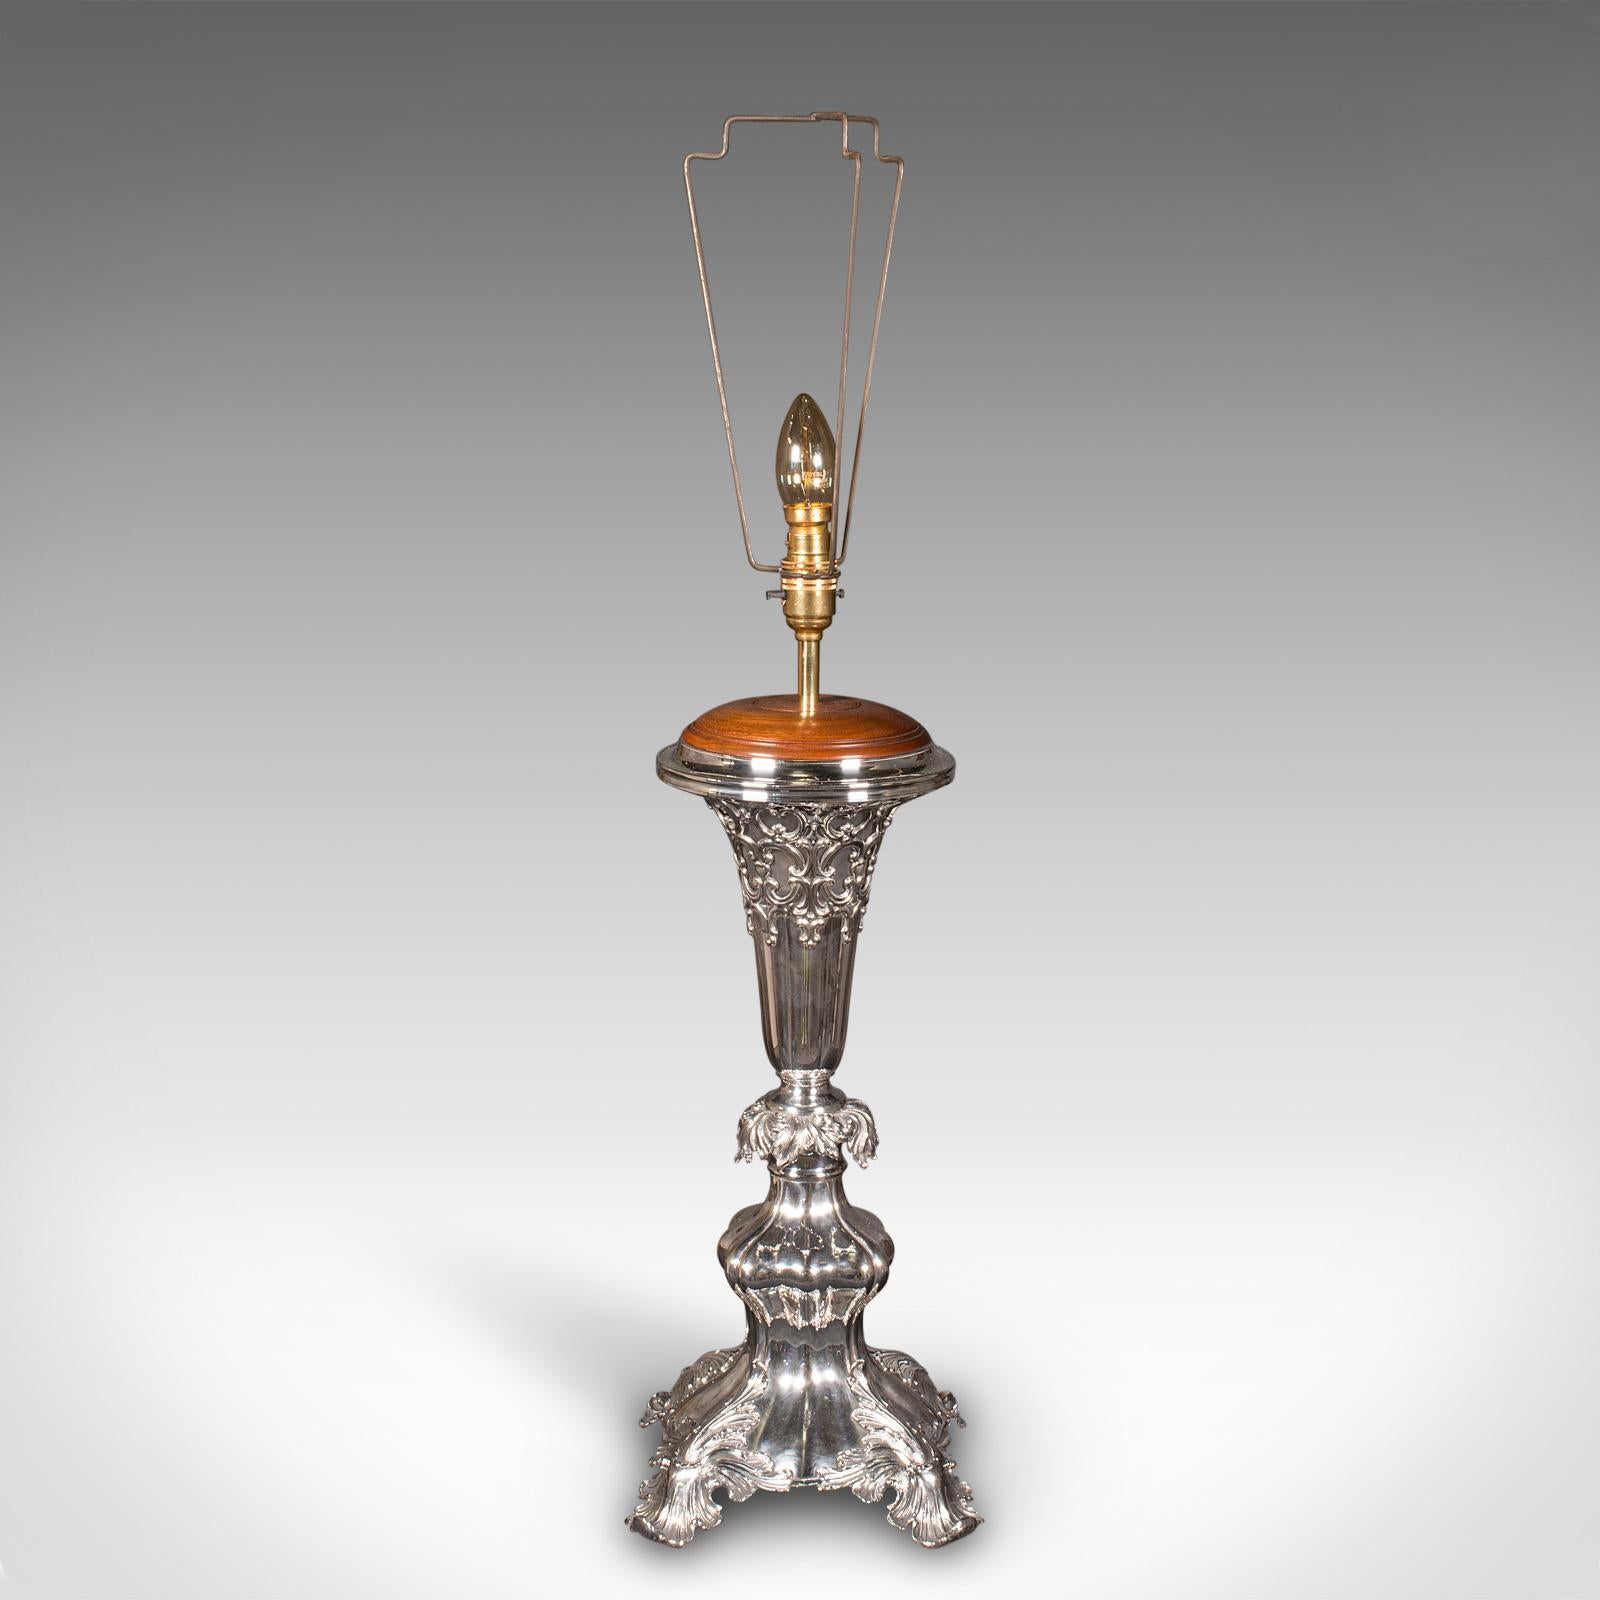 Large Antique Table Lamp, English Silver Plate, Walnut, Light, Victorian, C.1900 In Good Condition For Sale In Hele, Devon, GB